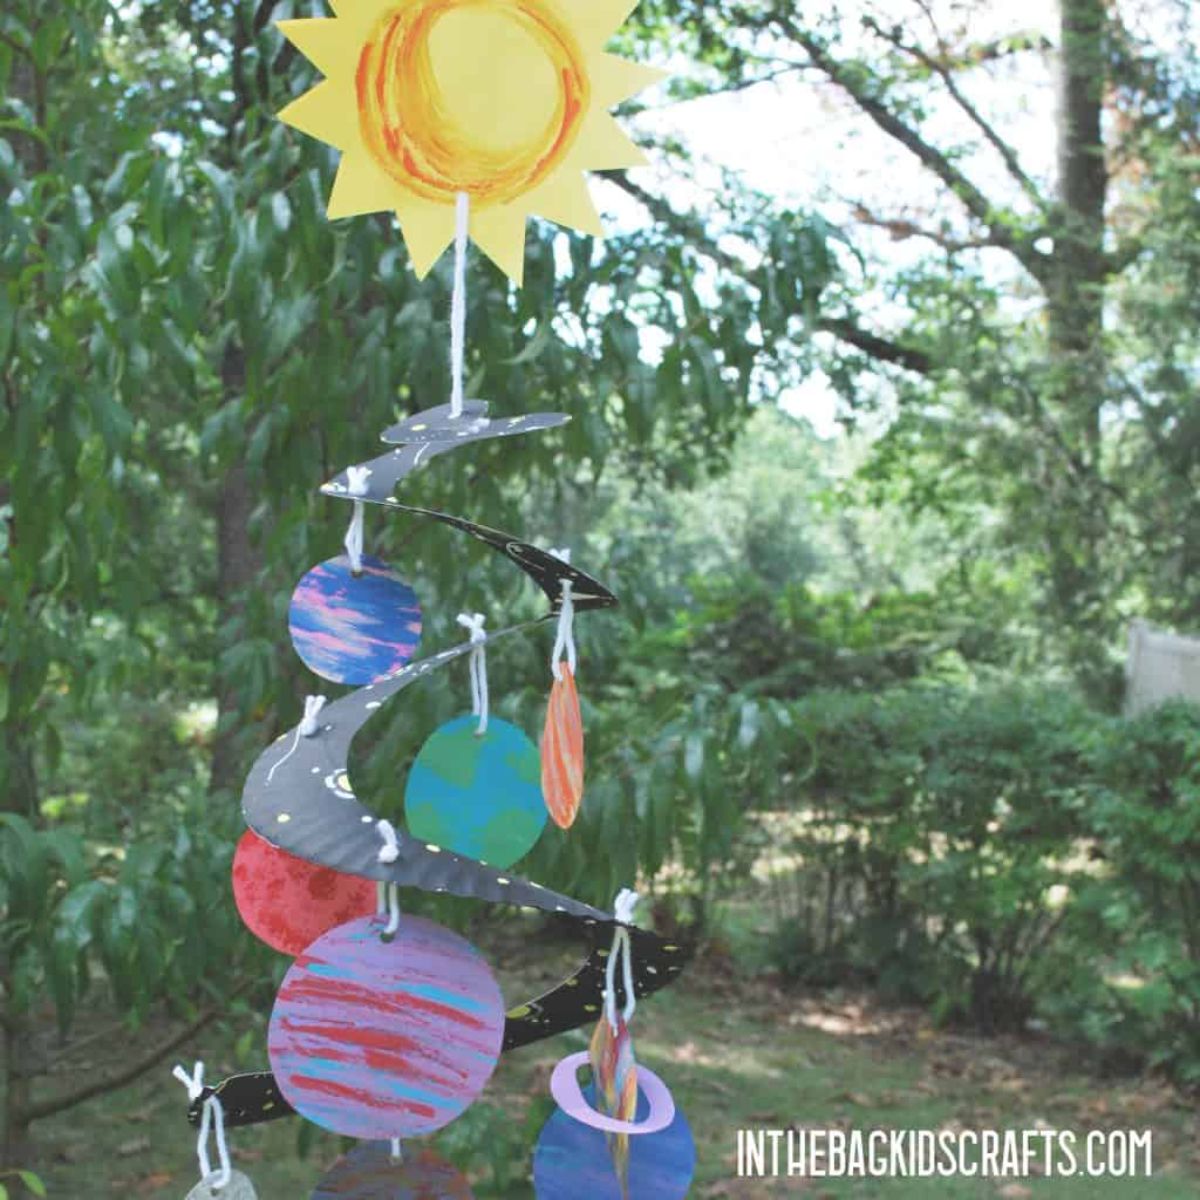 a swirled wind chime made of paper and decorated with the solar system hangs in front of trees